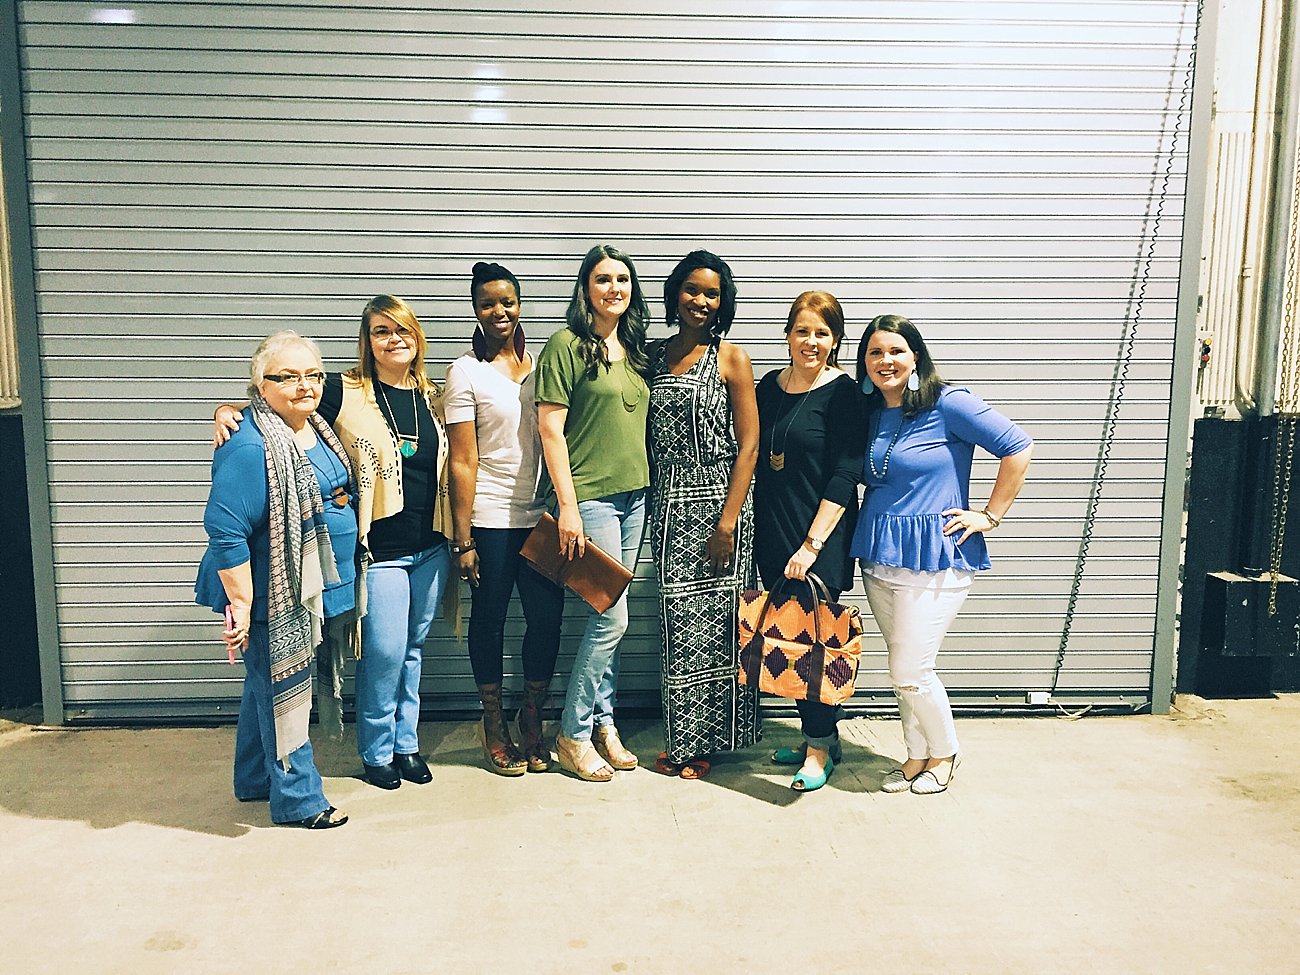 "Dressing with Purpose" Ethical Fashion Show at the Southern Women's Show in Raleigh, North Carolina 2016 | triFABB and Still Being Molly | North Carolina Fashion & Style Blogger (26)